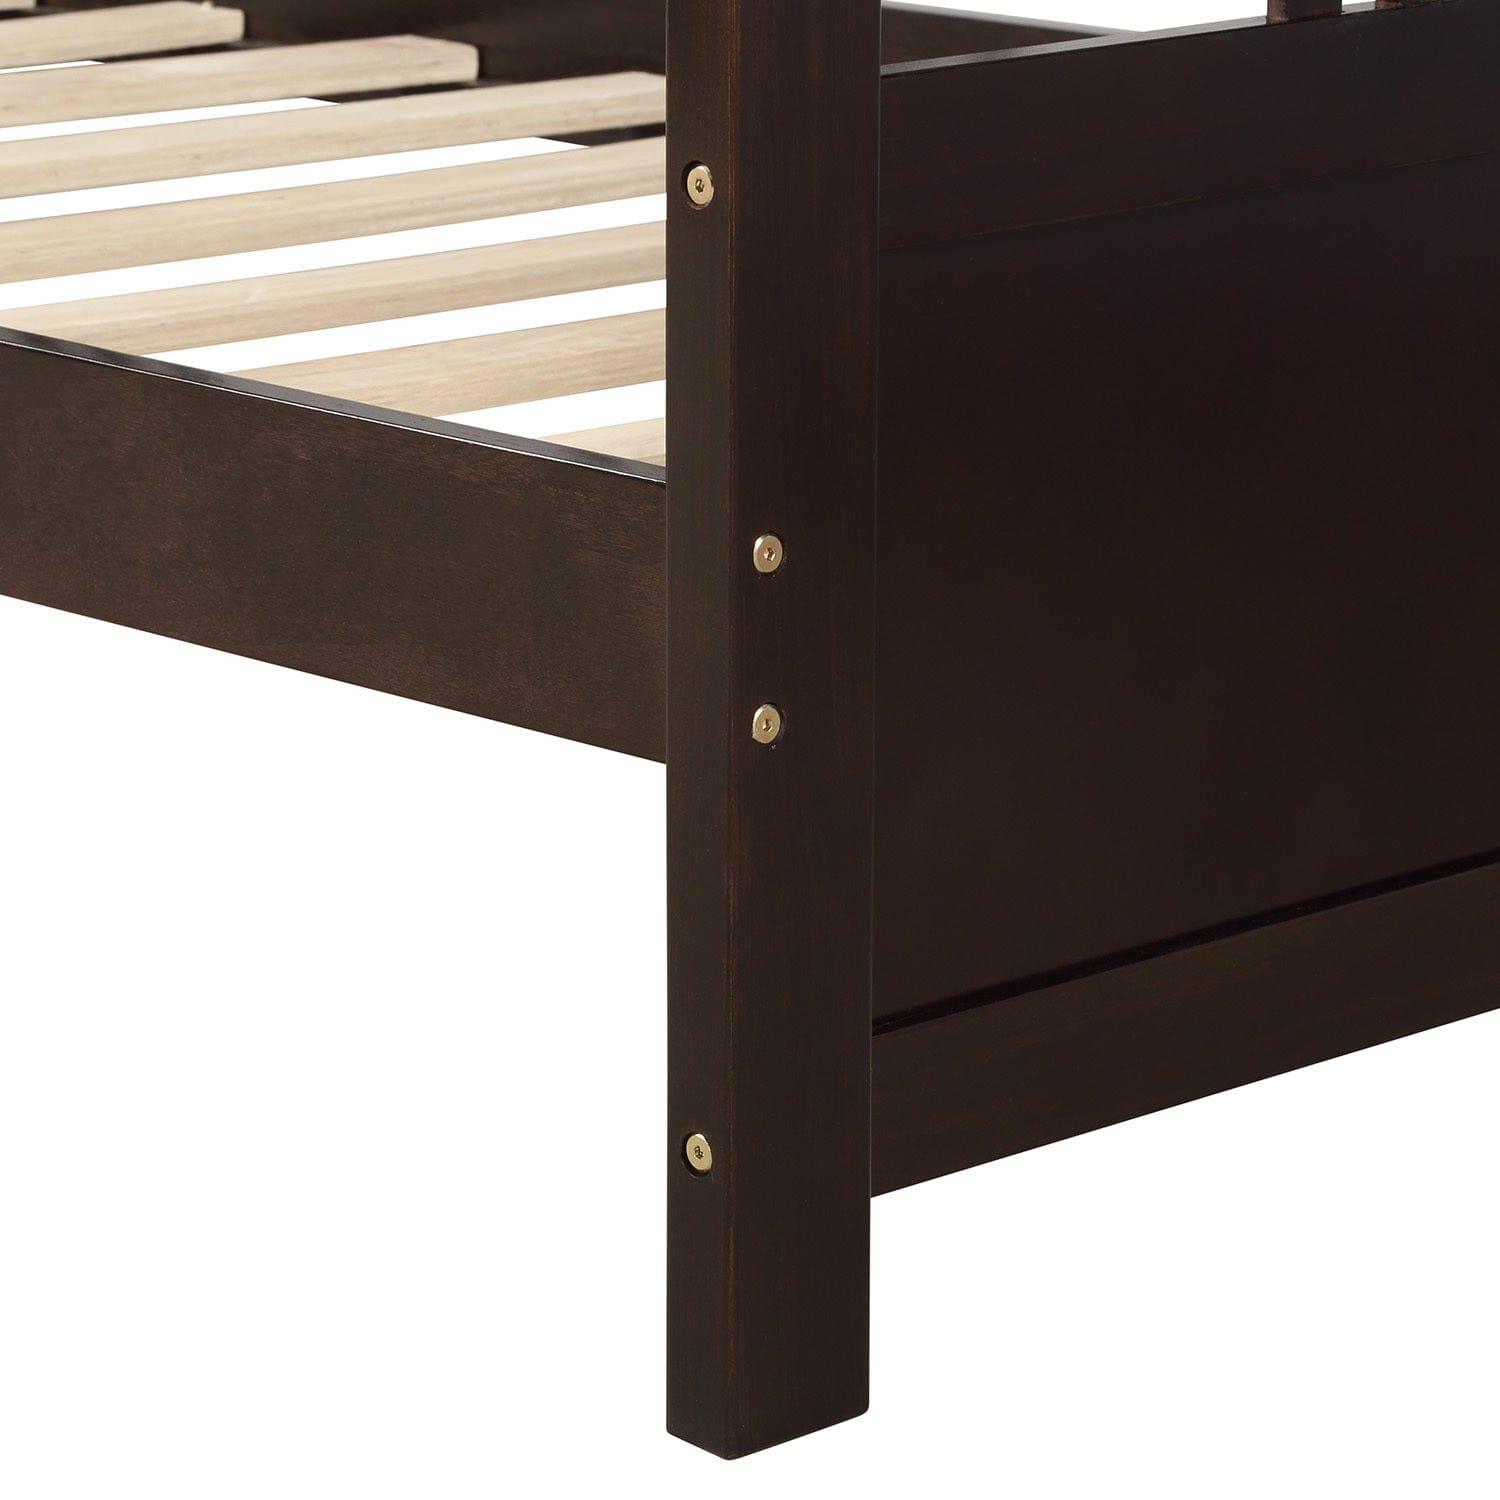 Shop Modern Solid Wood Daybed, Multifunctional, Twin Size, Espresso (Previous SKU: WF190234AAP) Mademoiselle Home Decor